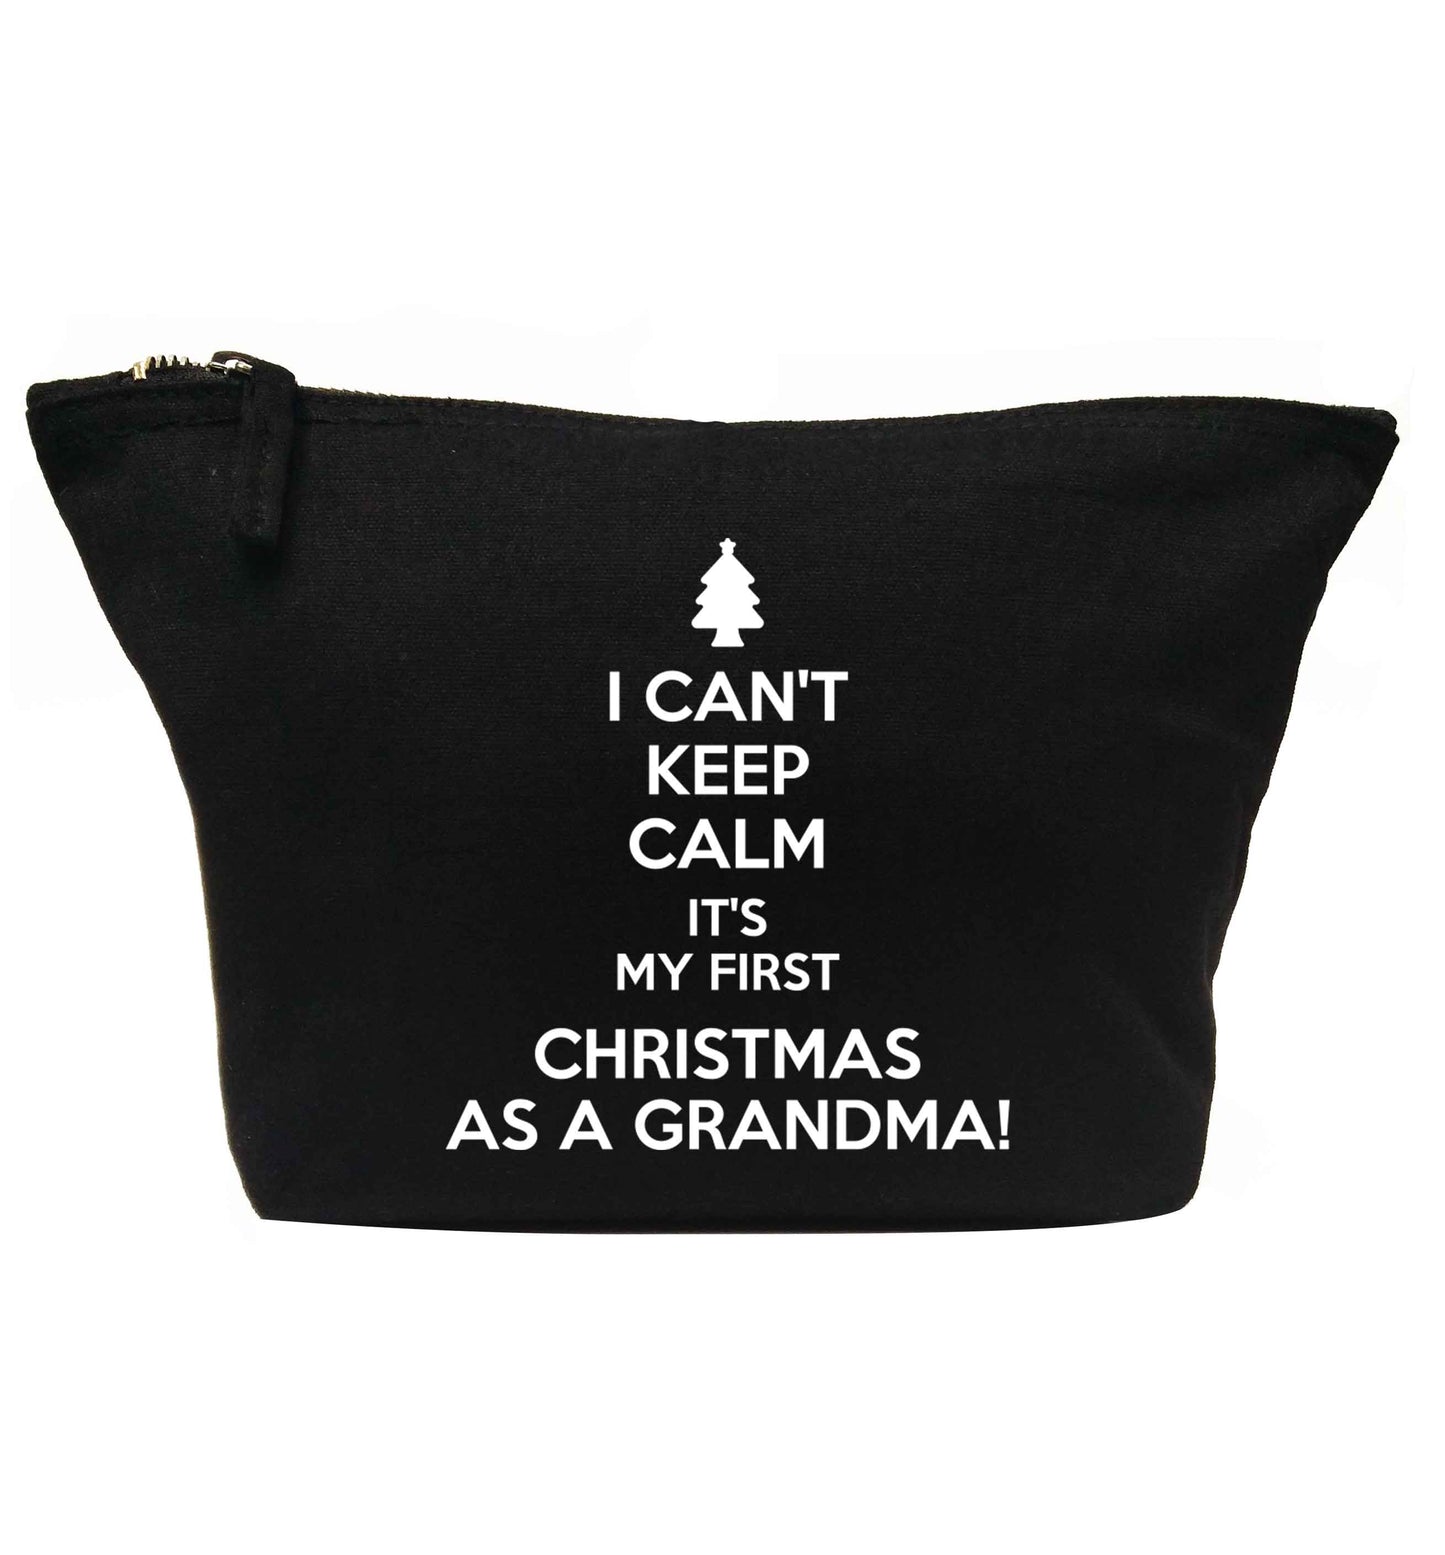 I can't keep calm it's my first Christmas as a grandma! | makeup / wash bag